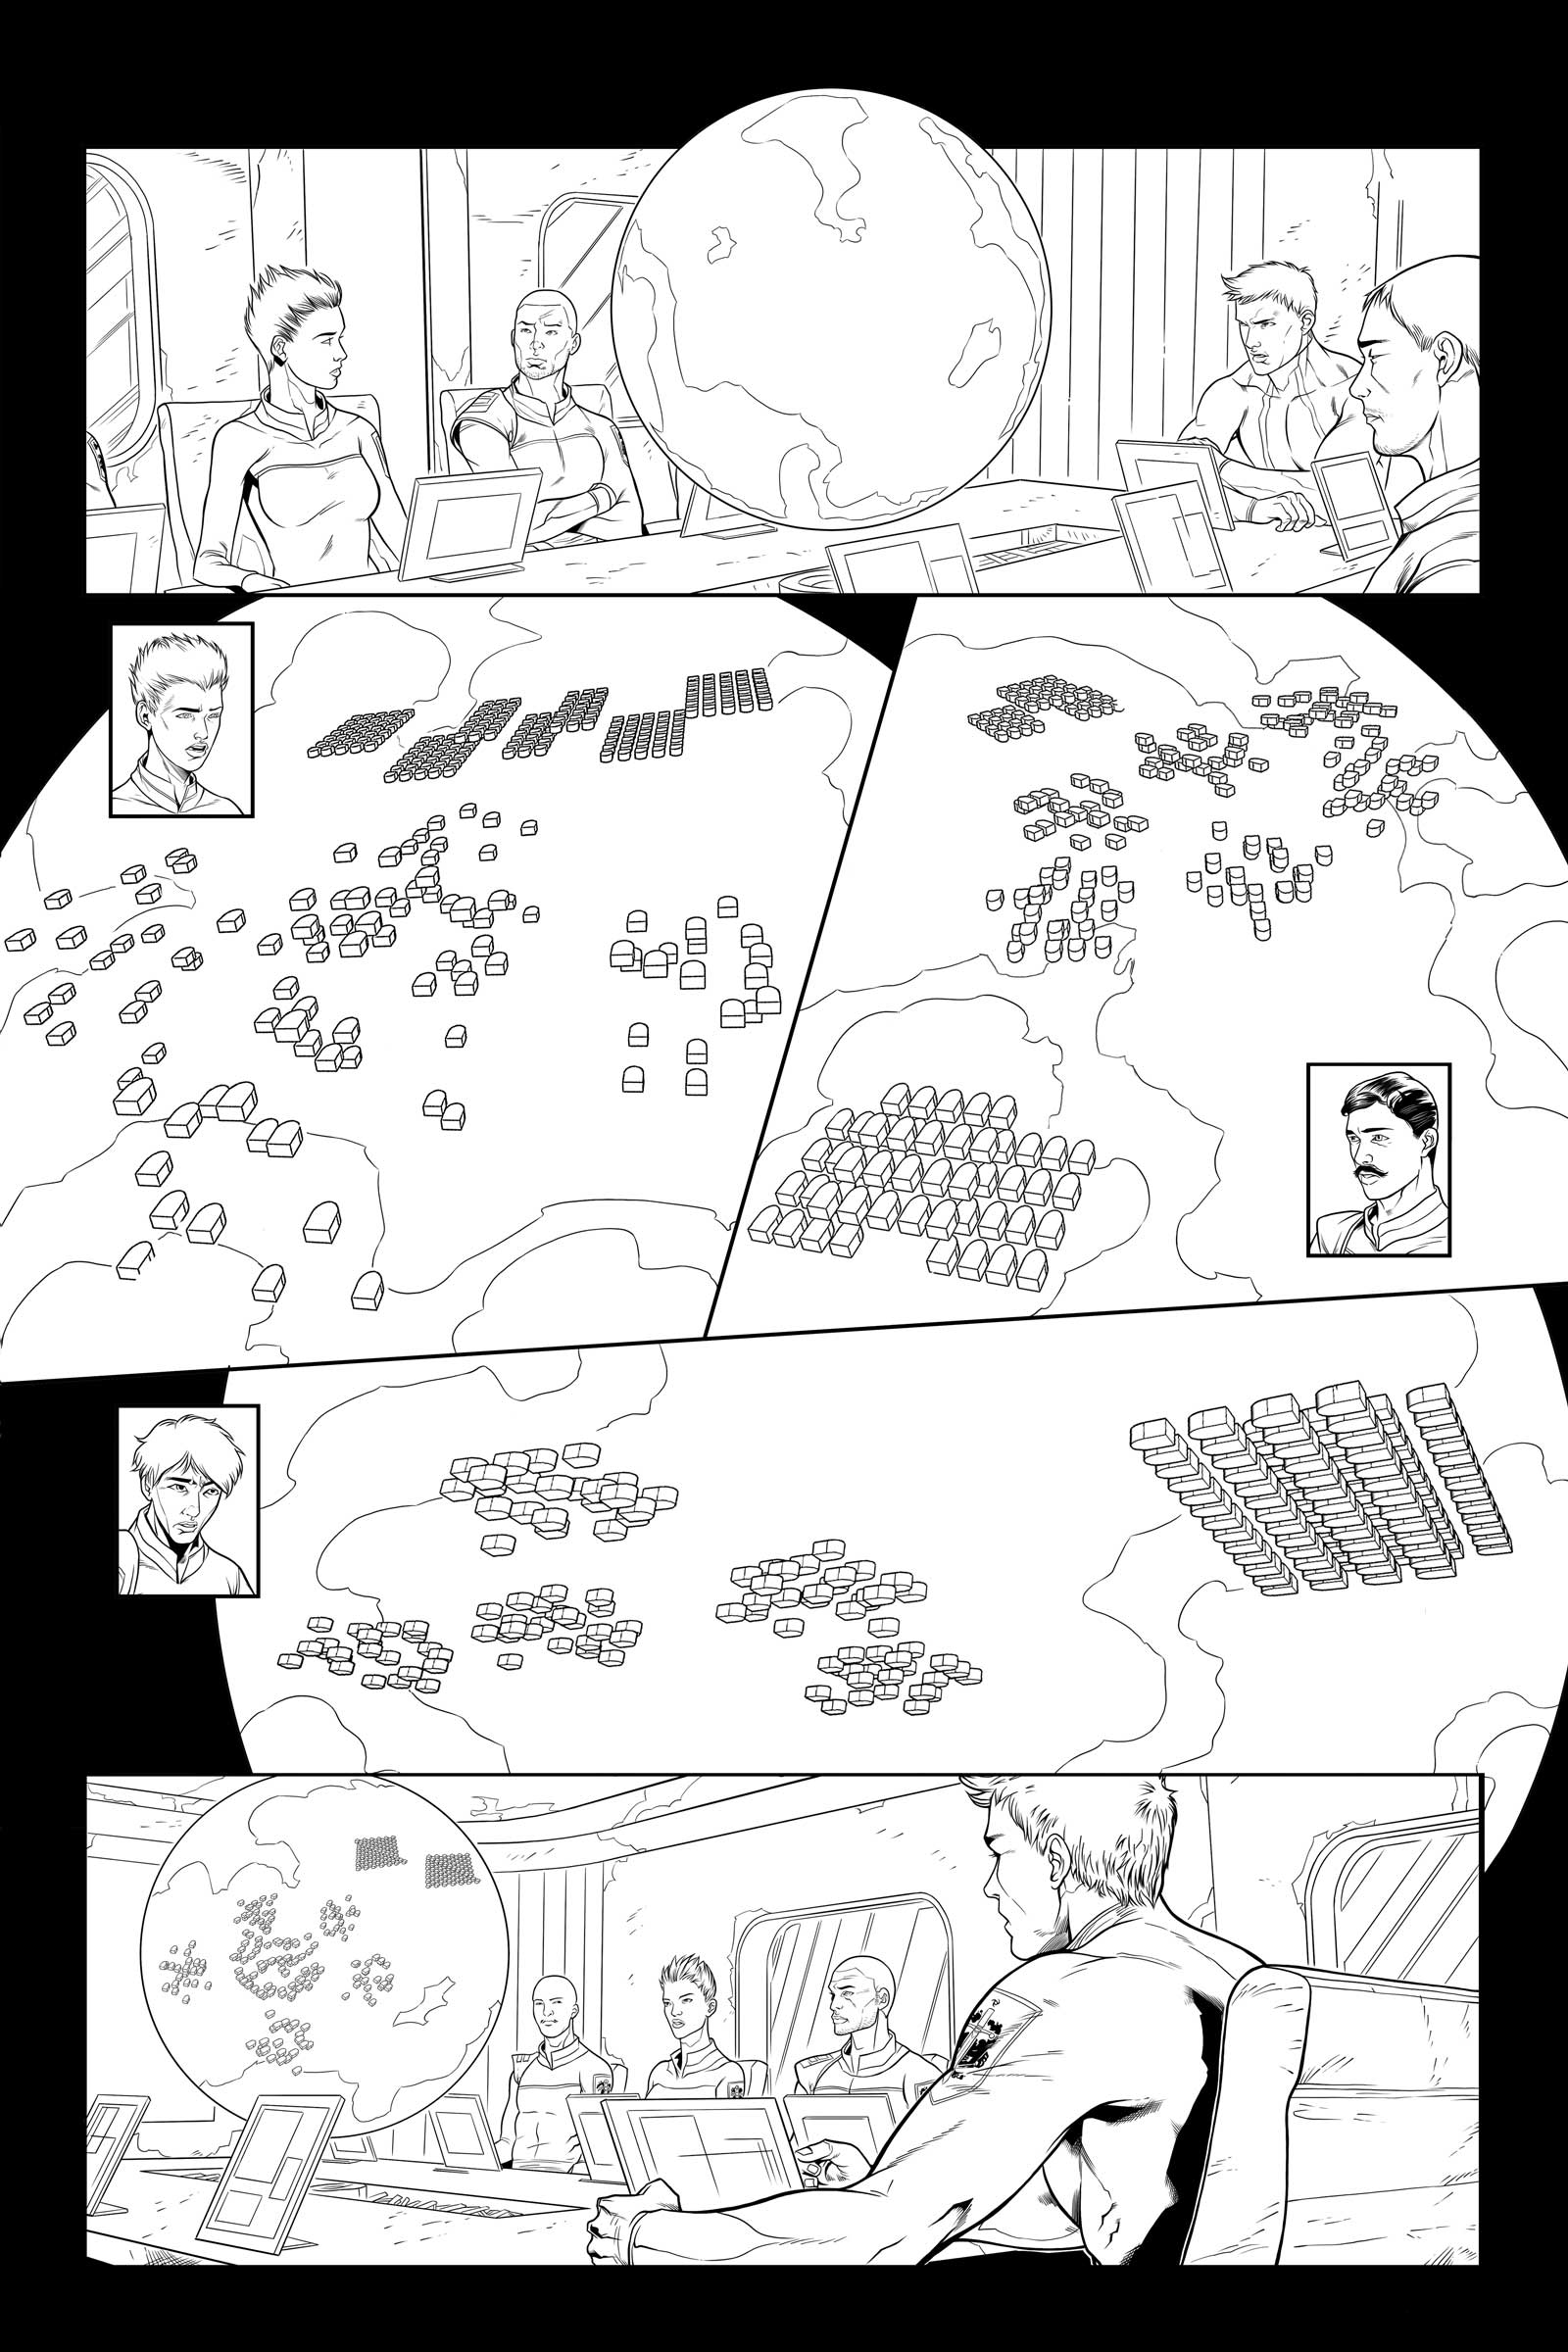 The page from Lost Fleet #4 with a revised look thanks to John Hemry's input